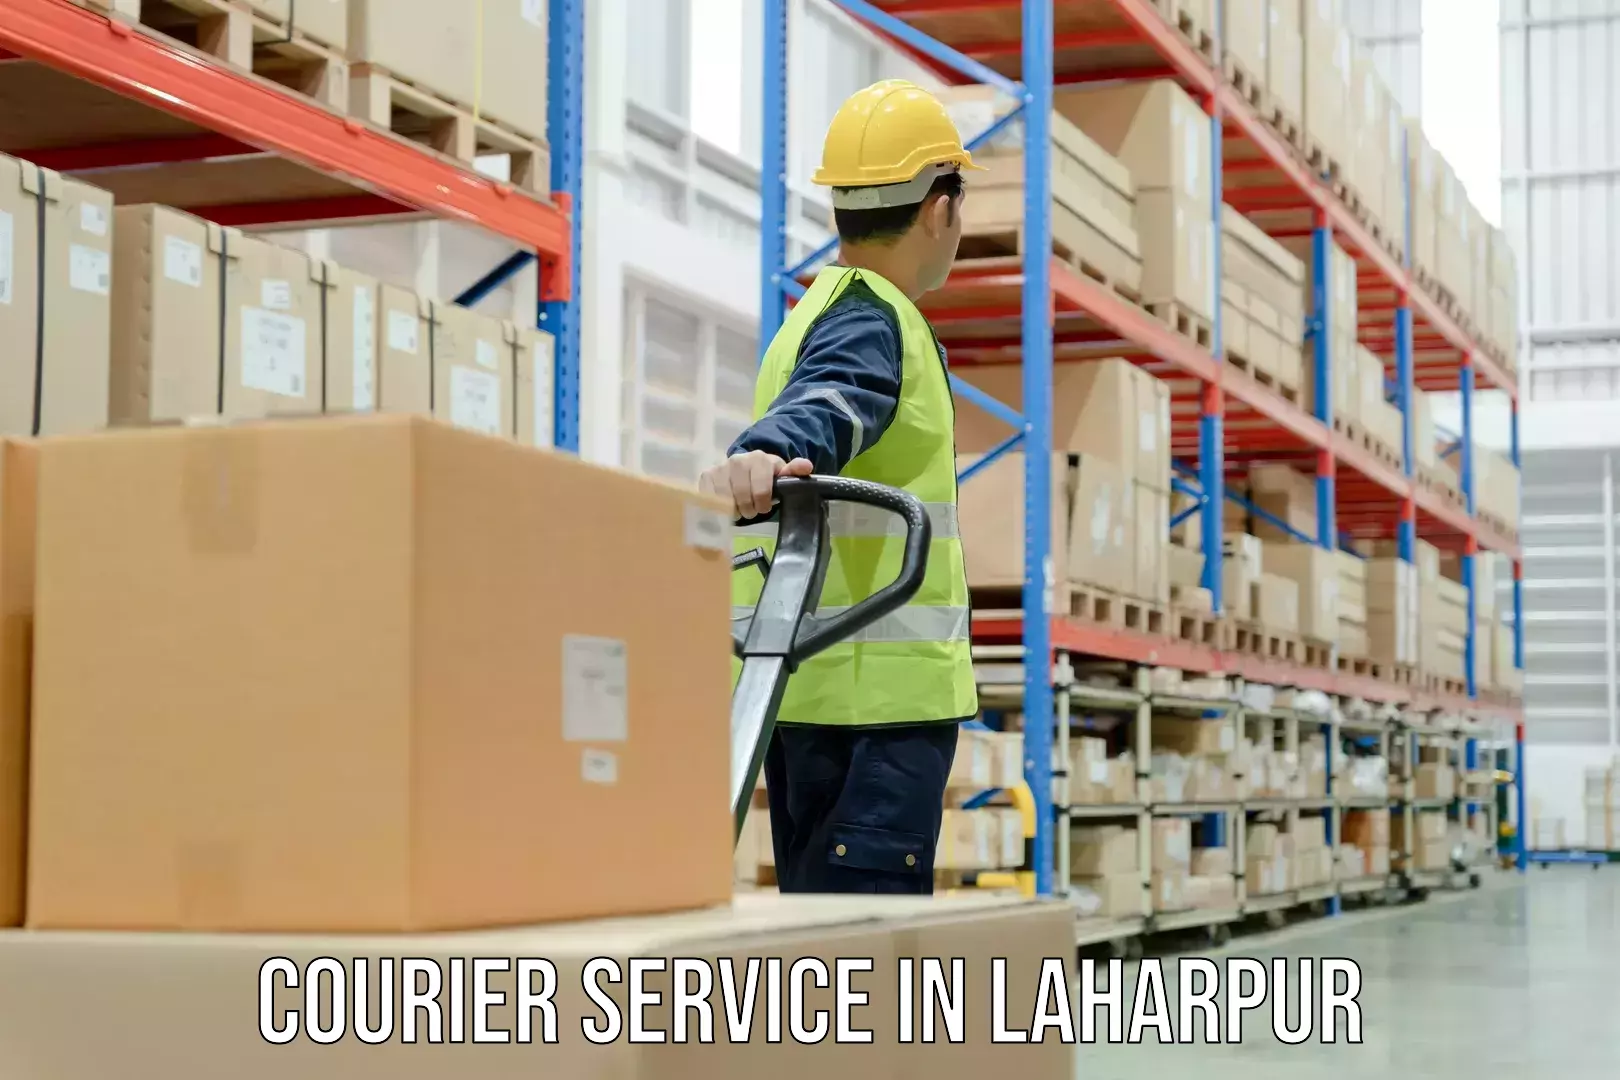 Overnight delivery services in Laharpur